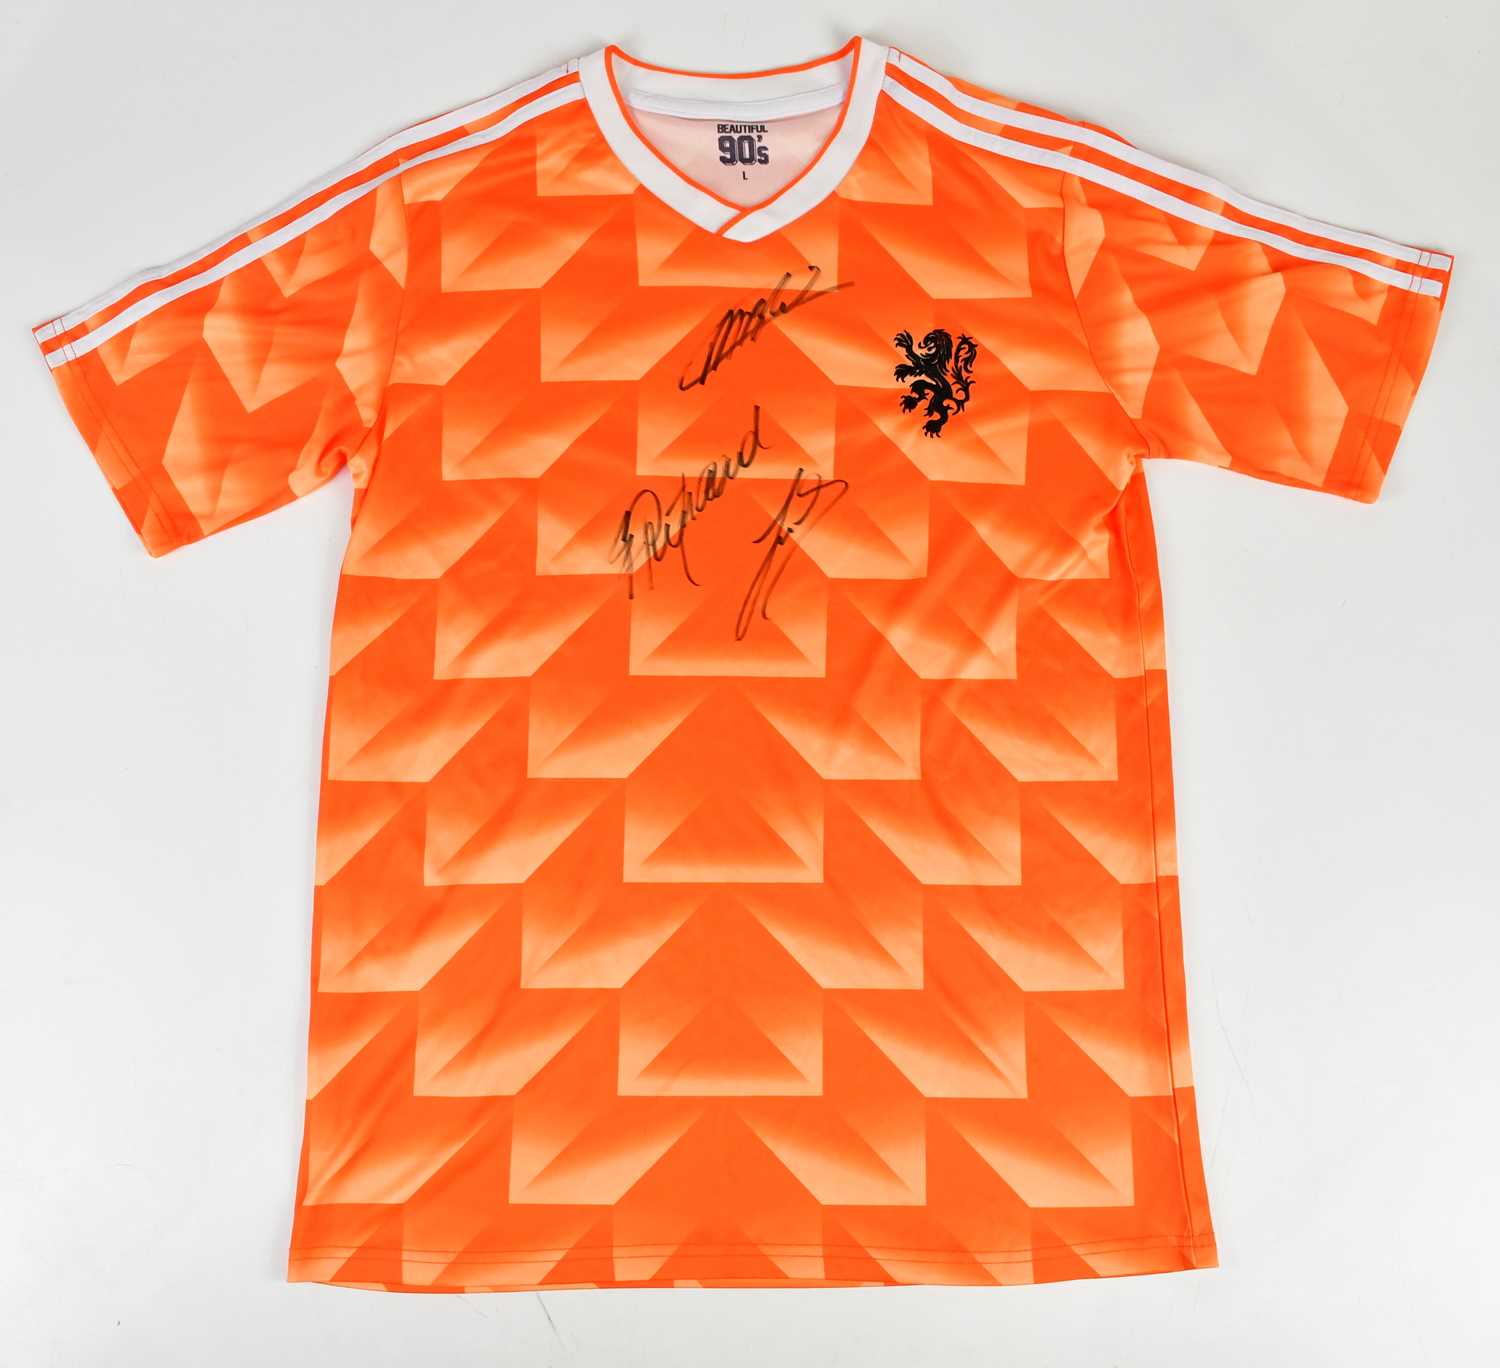 NETHERLANDS; a 1988 retro style signed football shirt, signed to the front by Rijkaard, Gullit and